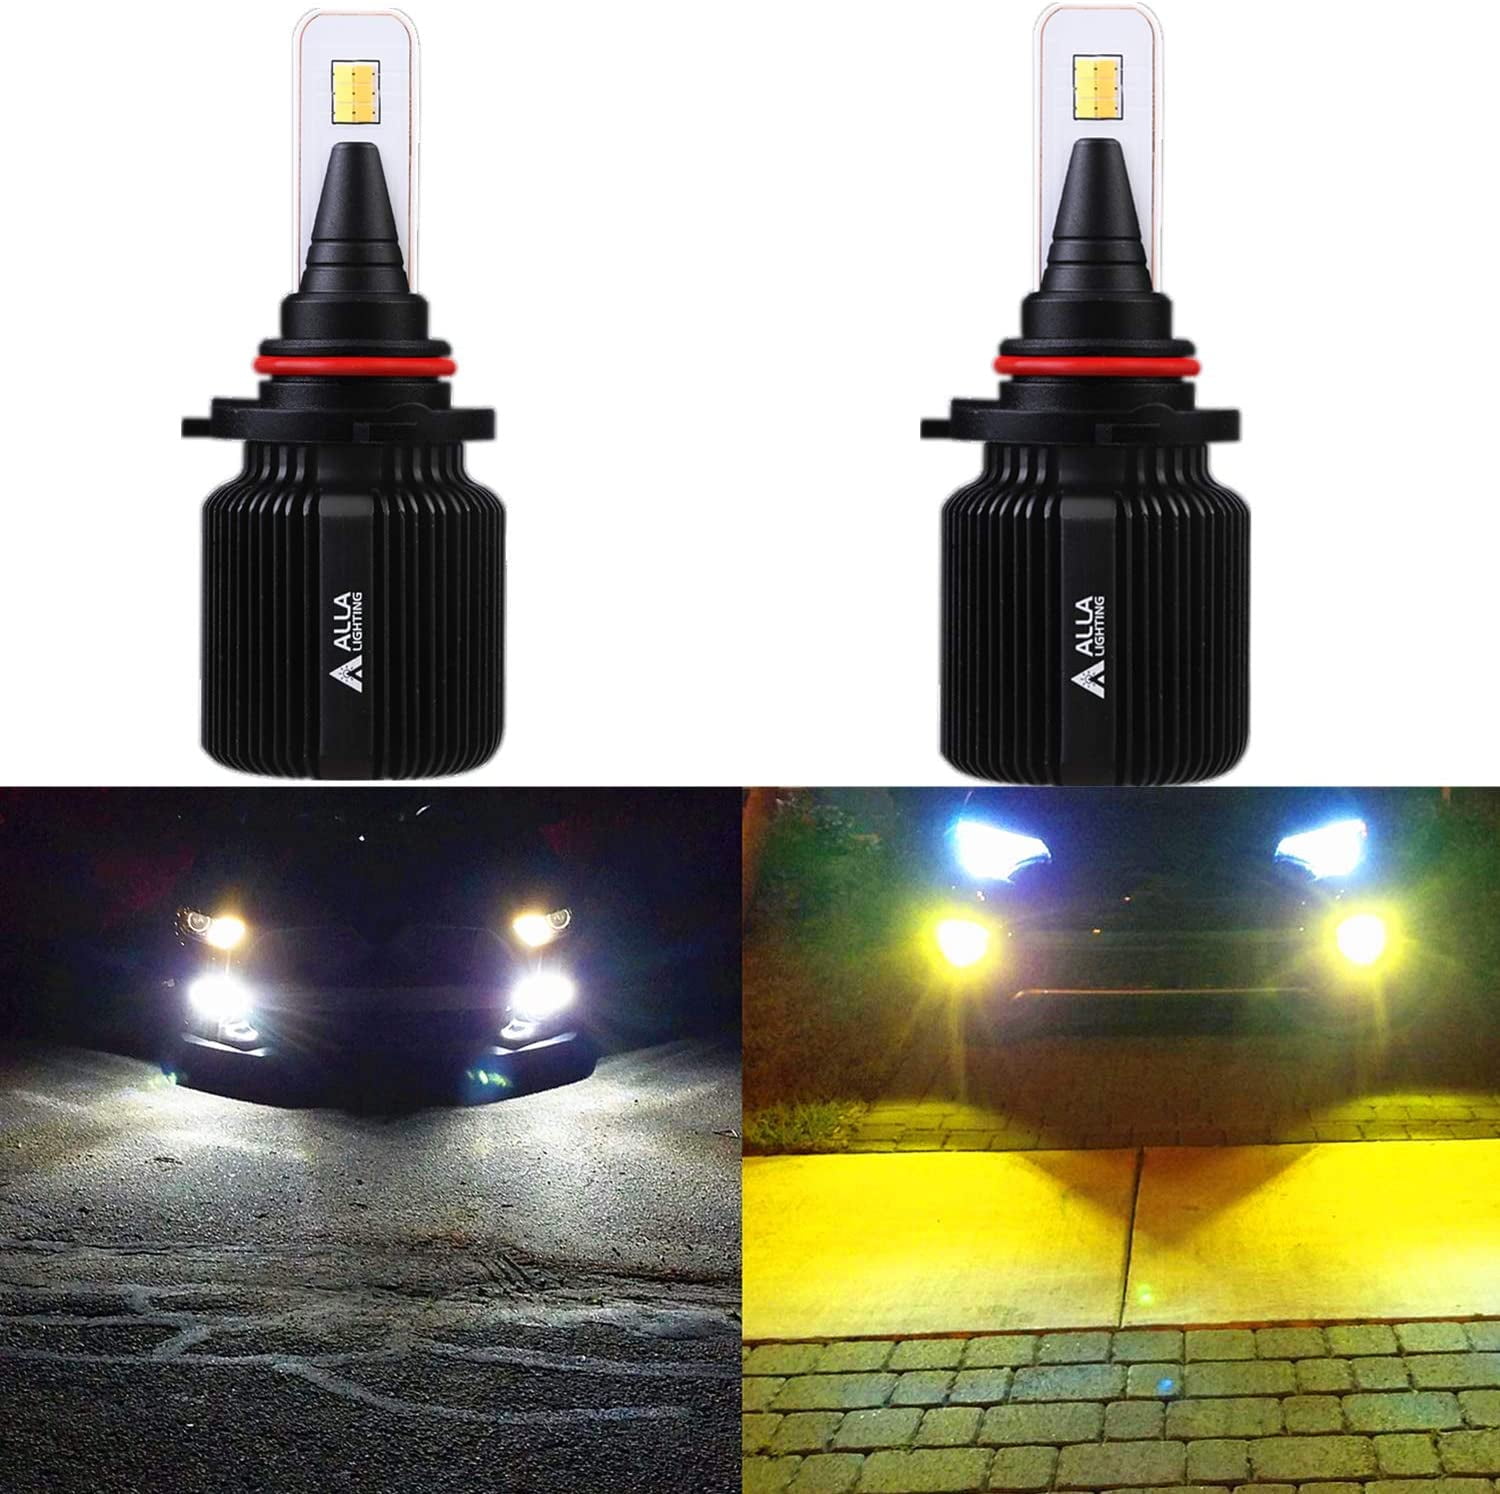 H3 LED Fog Lights Bulb Yellow Amber Gold Golden 3000K for Trucks Cars Lamps Kit Plug Error Free All in One High Power Replacement Bulbs 12V 30W 2800LM Super Bright COB Chips 1 Year Warranty【1797】